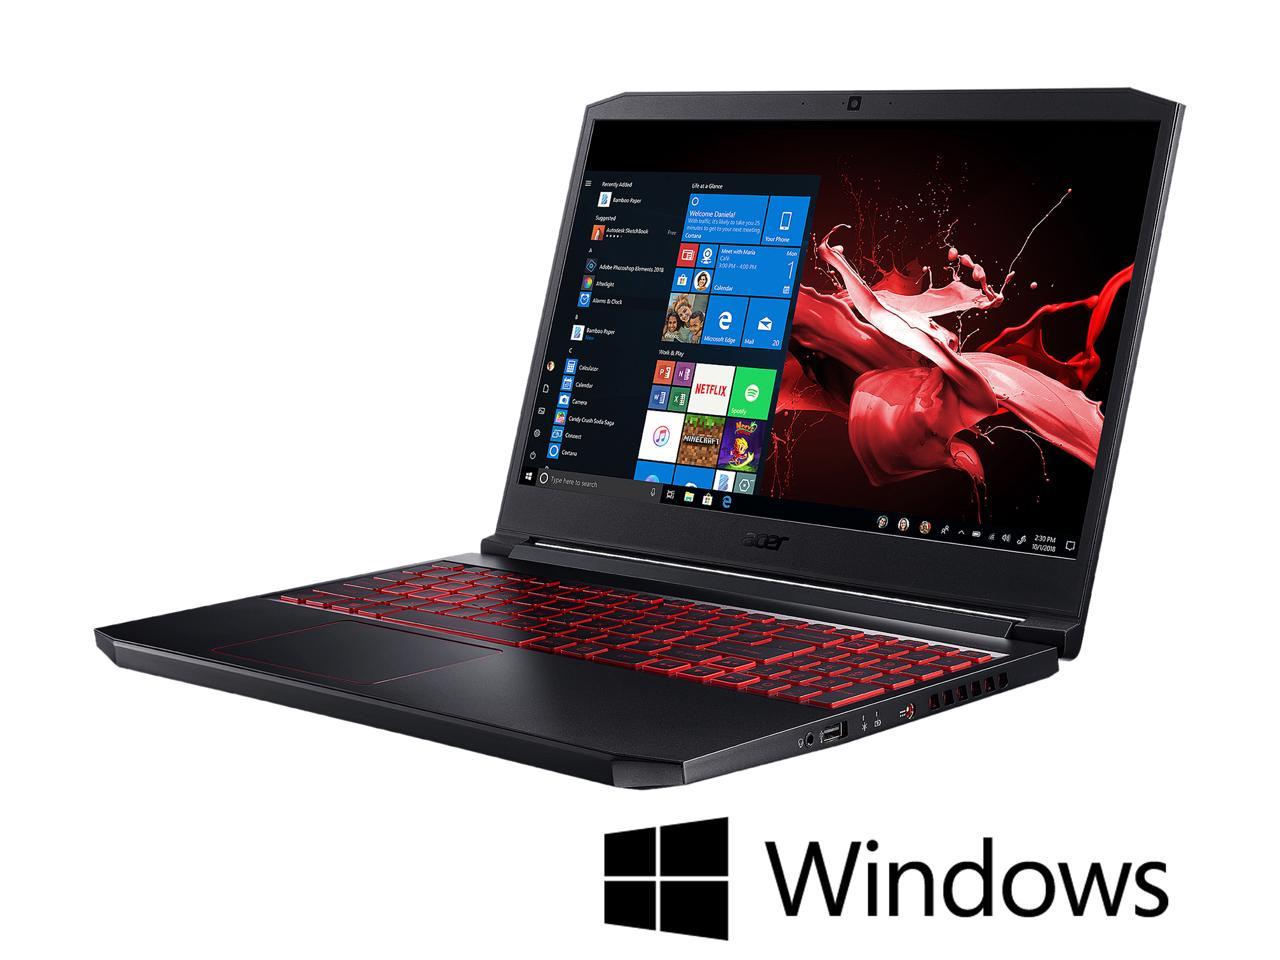 Acer Nitro 7 (AN715-51-70TG) 15.6″ Gaming Laptop with 9th Gen Core i7, 8GB RAM, 256GB SSD